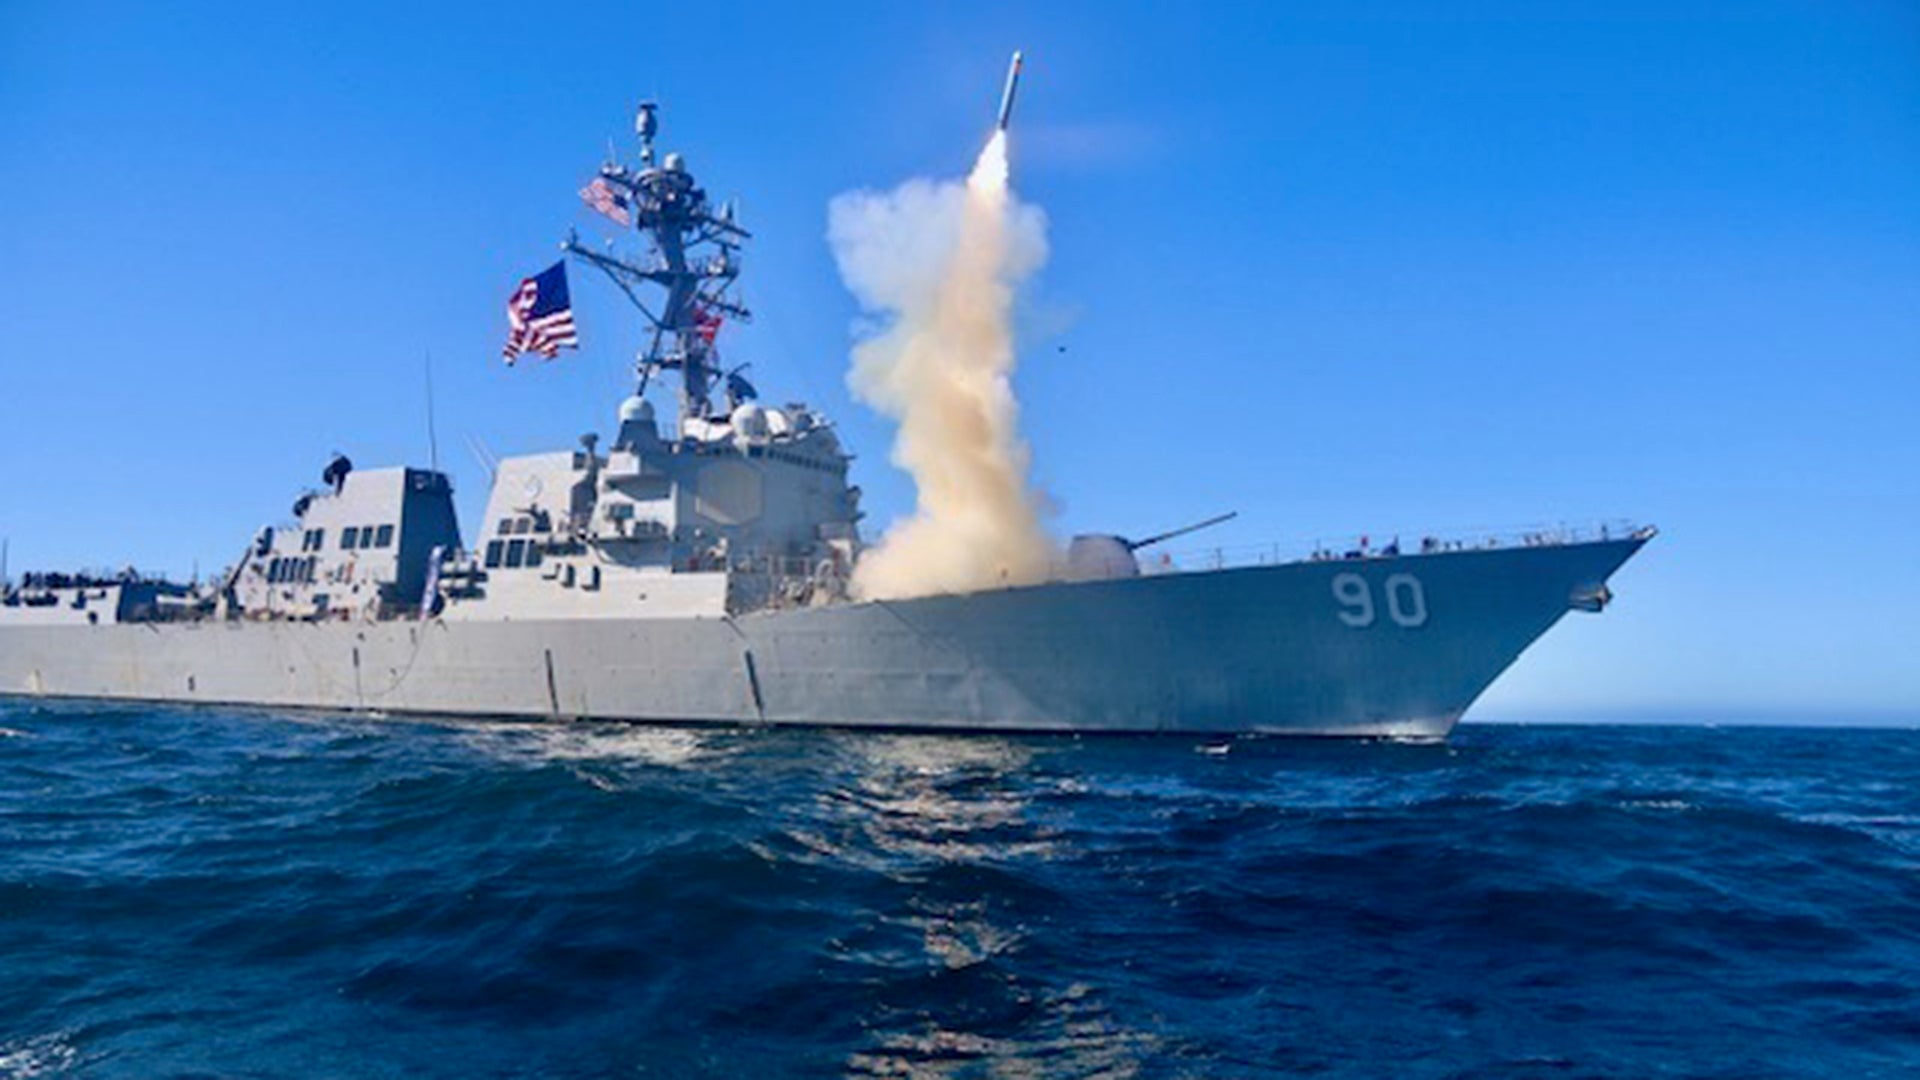 The guided-missile destroyer USS Chafee (DDG 90) launches a Block V Tomahawk, the weapon’s newest variant, during a three day missile exercise on Nov. 30, 2020. (Ens. Sean Ianno/U.S. Navy)